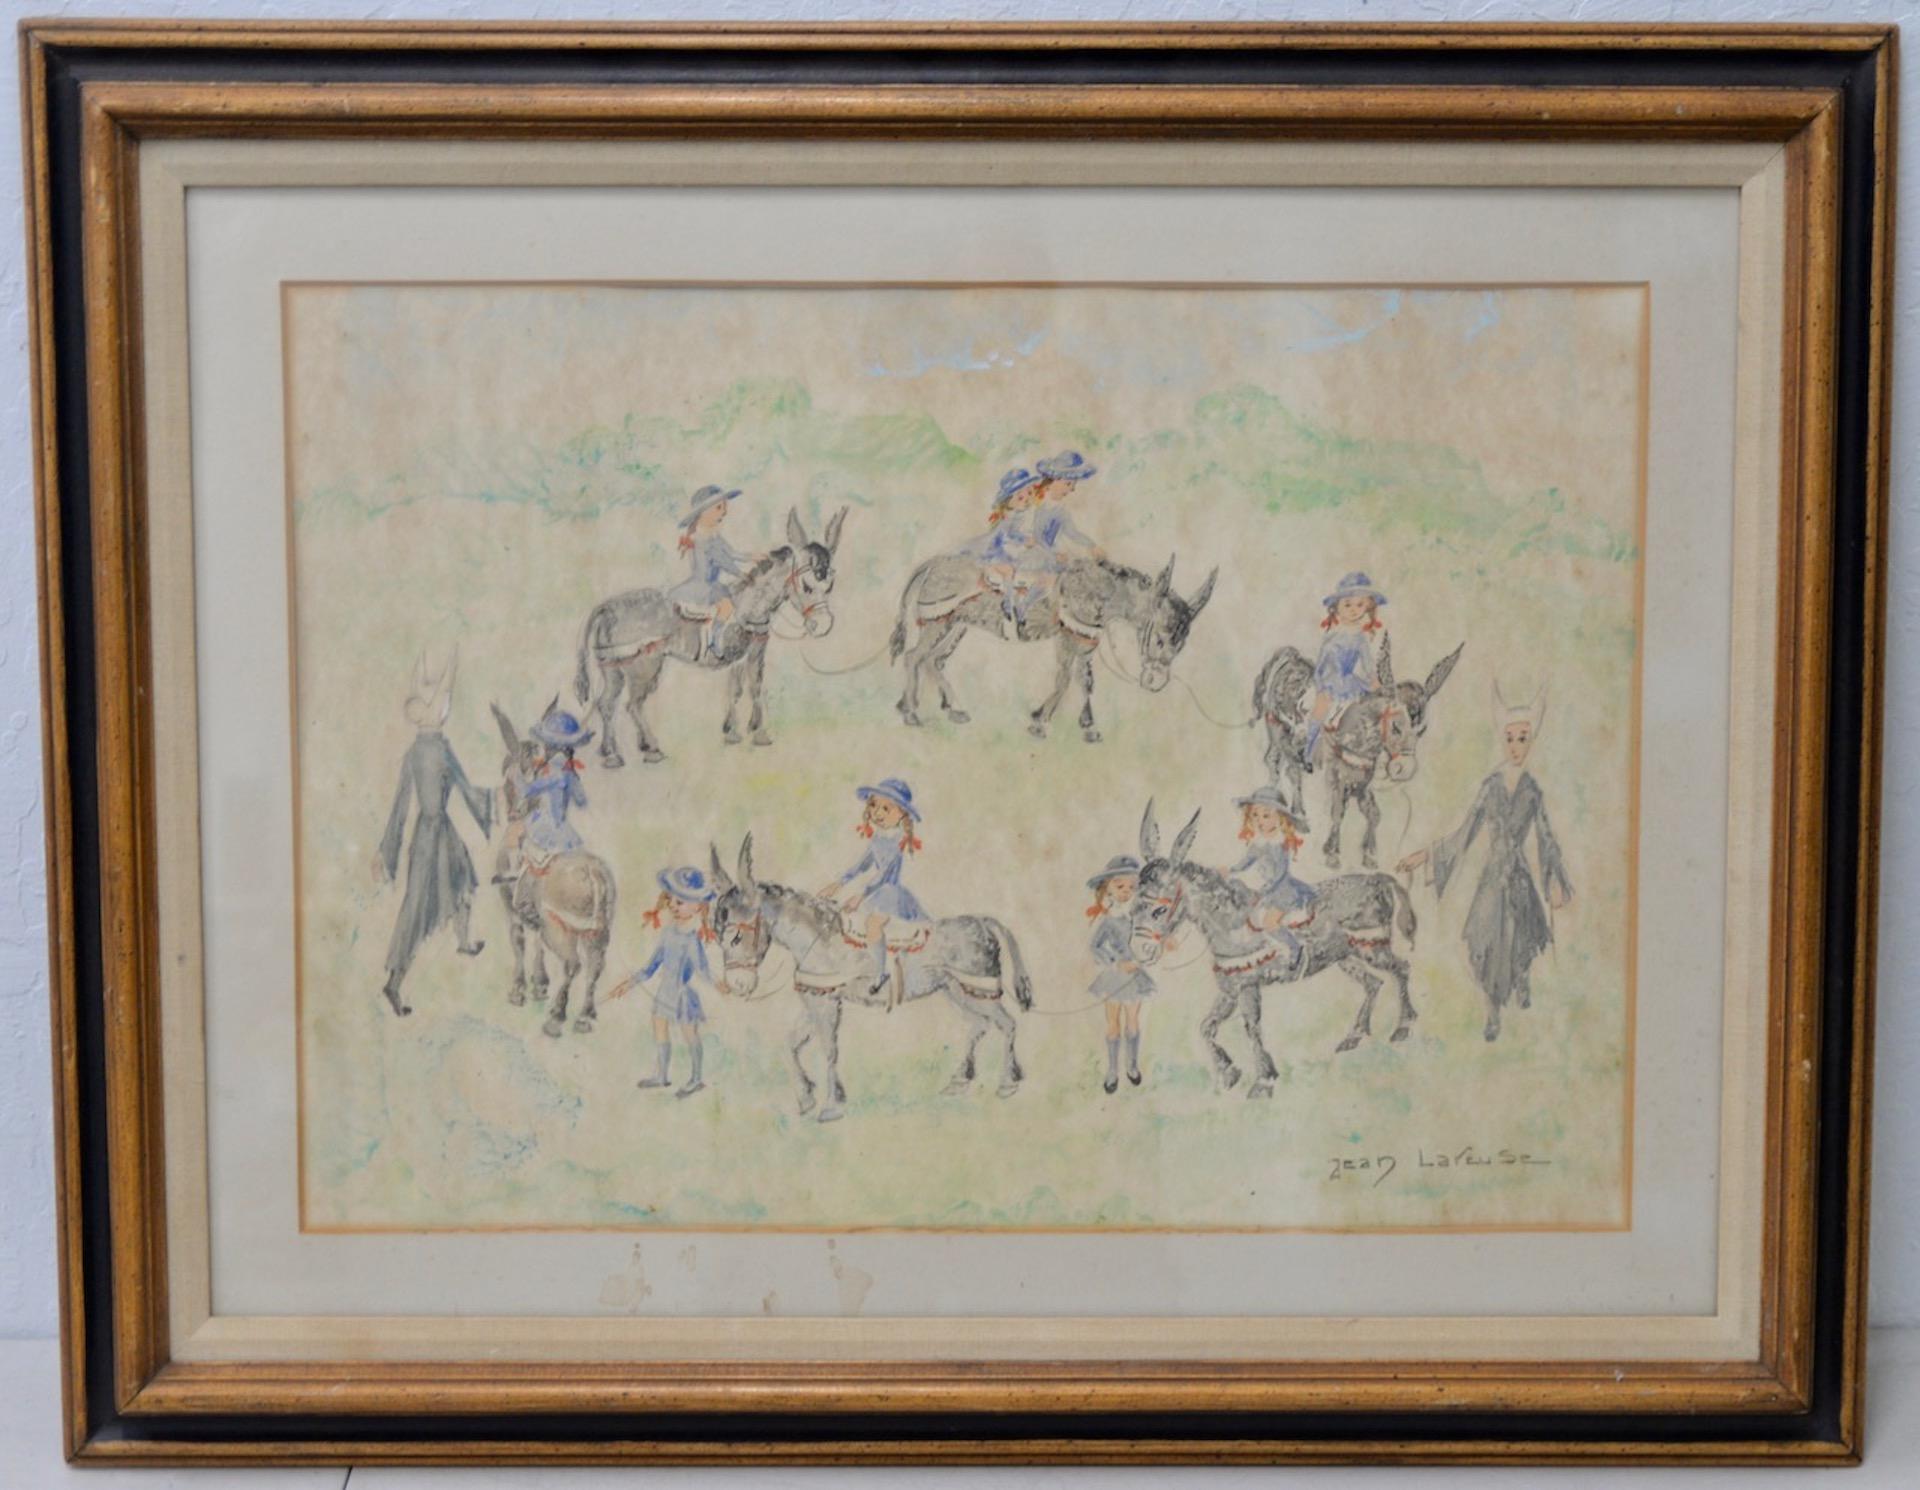 Jean Lareuse "School Girls on a Donkey Ride" Original Watercolor c.1950

Charming original watercolor by listed French artist Jean Lareuse (b.1926)

A group of French school girls in their lovely blue uniforms are on a donkey ride.

Original